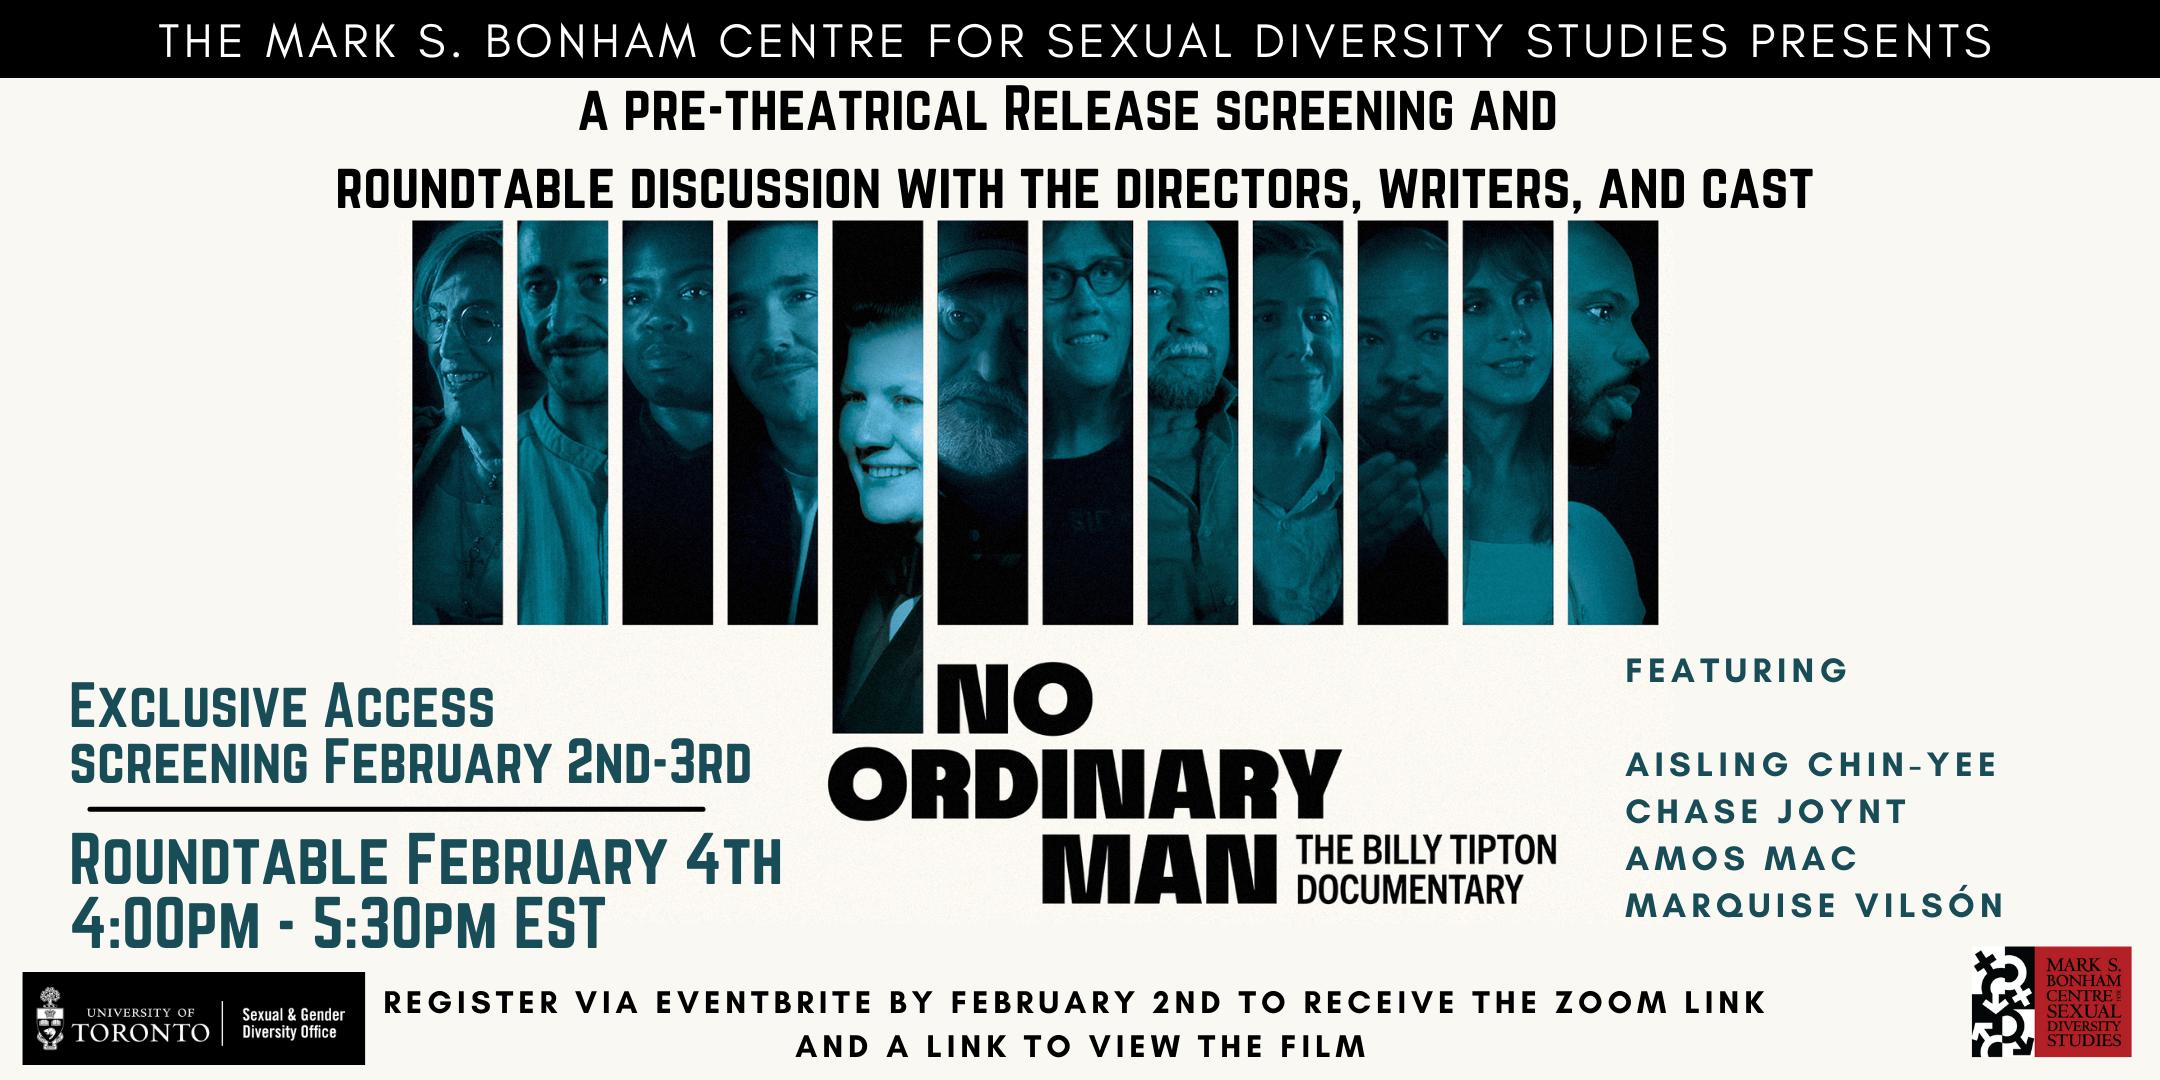 No Ordinary Man: The Billy Tipton Documentary Screening and Roundtable Discussion with Directors, Writers, and Cast